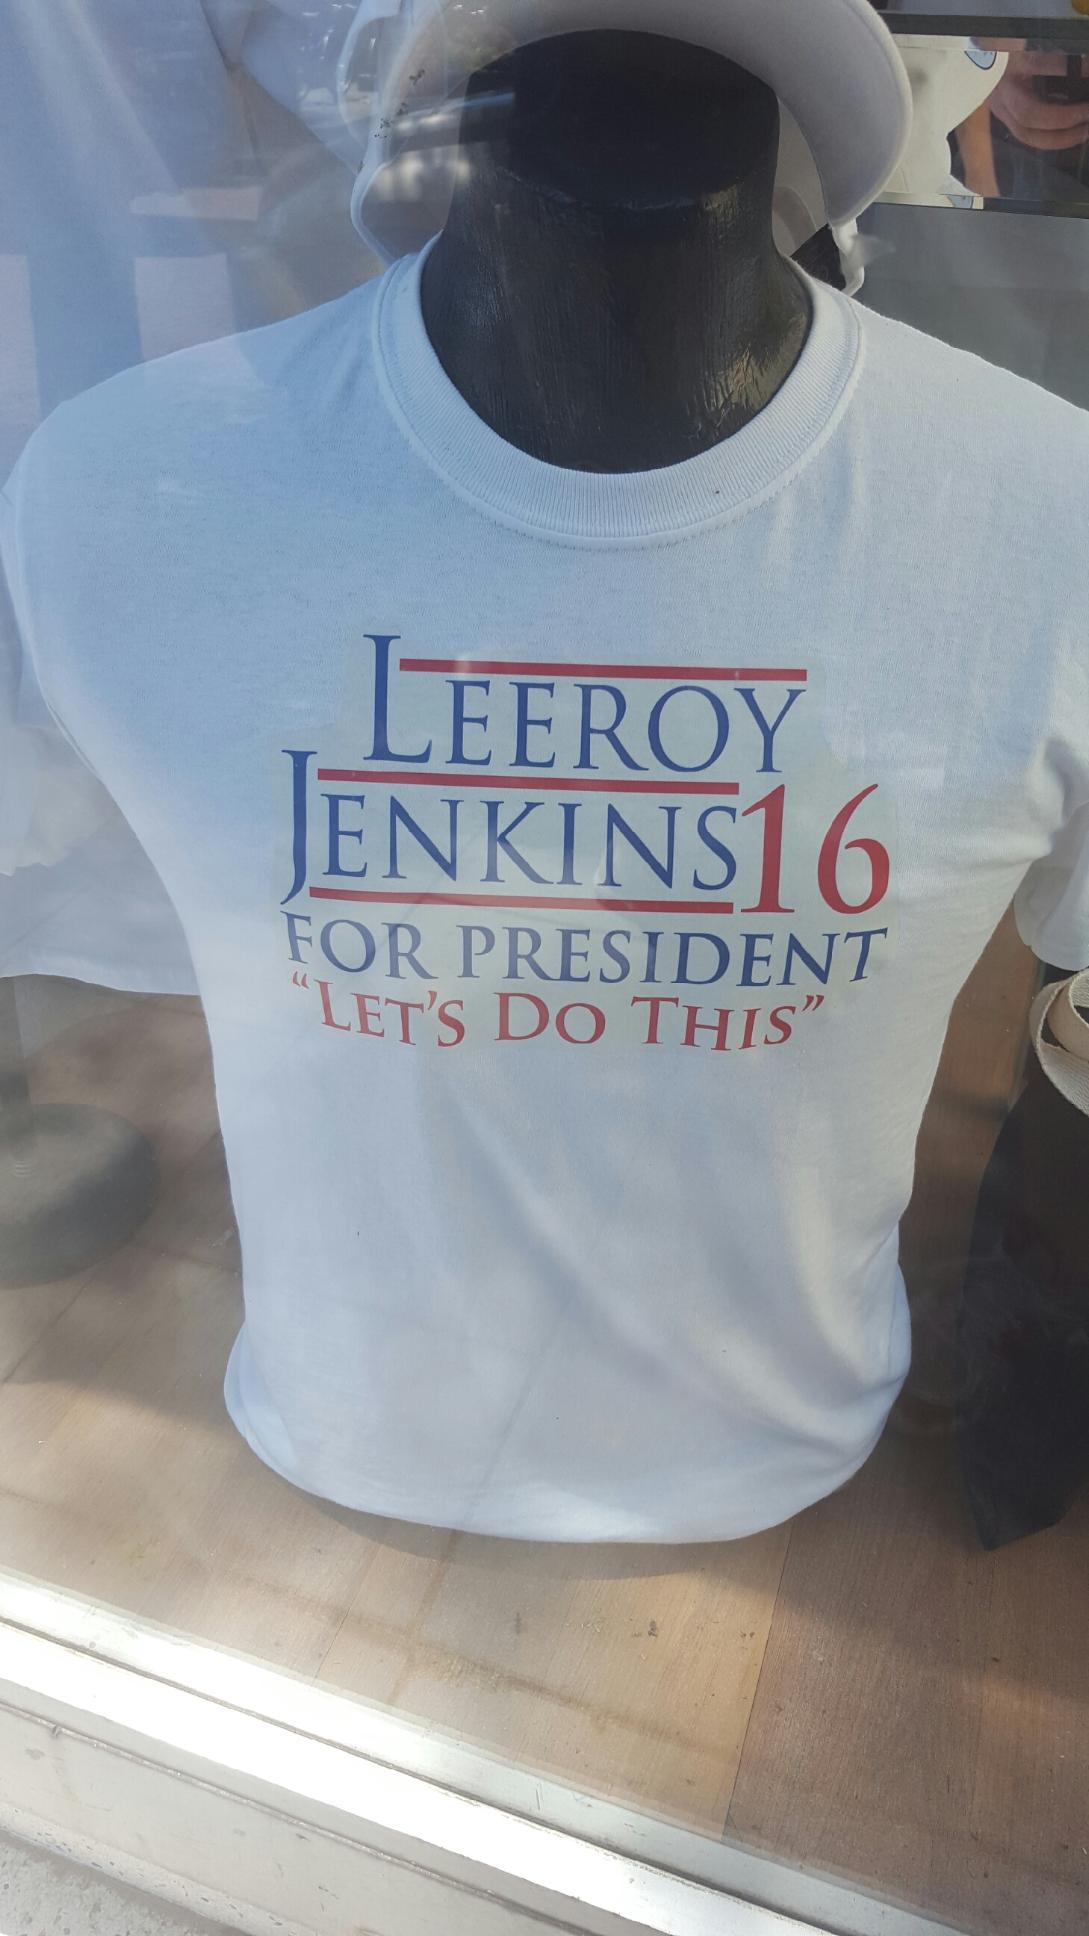 t shirt - Leeroy JENKINS16 For President "Let'S Do This"